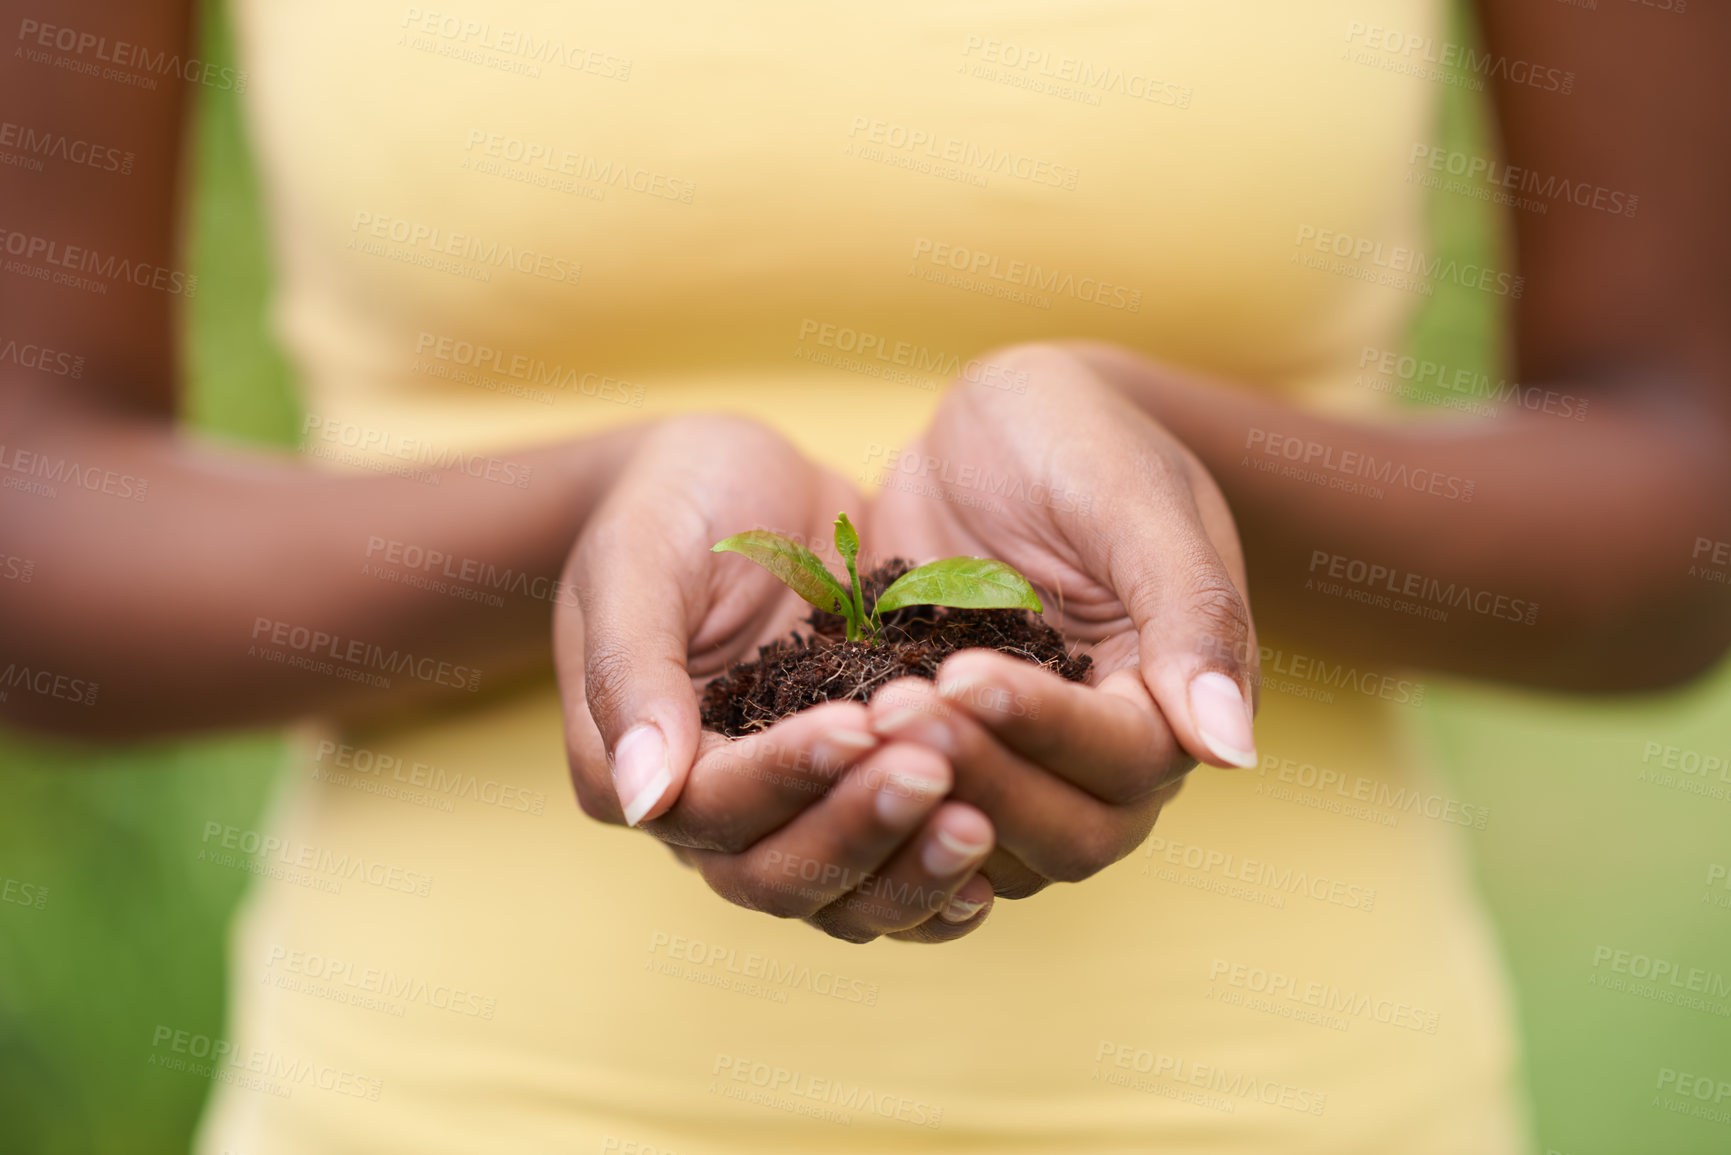 Buy stock photo Soil in hands of woman, leaves and ecology with growth of environment, nature and sustainability with life. Seedling, development and eco friendly, hope and new beginning or start with agriculture